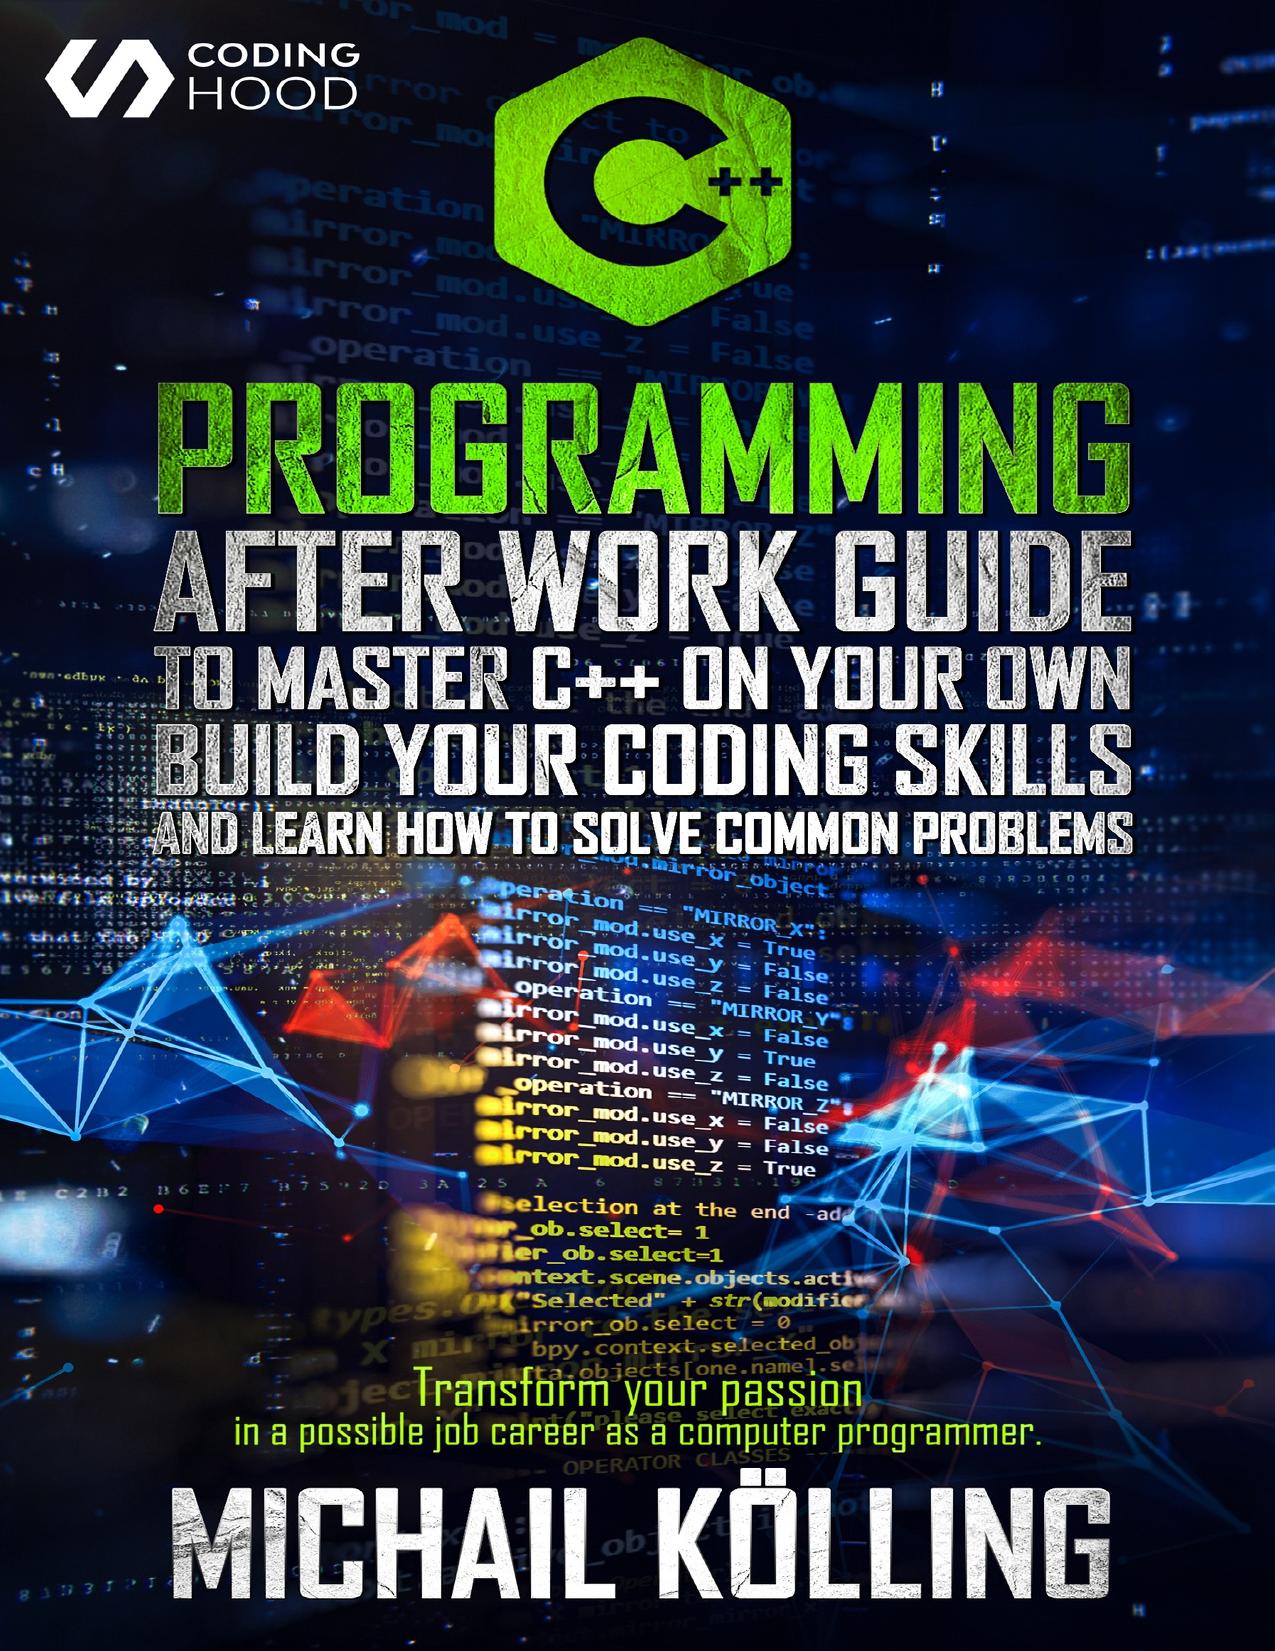 C++ Programming : After work guide to master C++ on your own. Build your coding skills and learn how to solve common problems. Transform your passion in ... job career as a computer programmer. by HOOD CODING & Kölling Michail